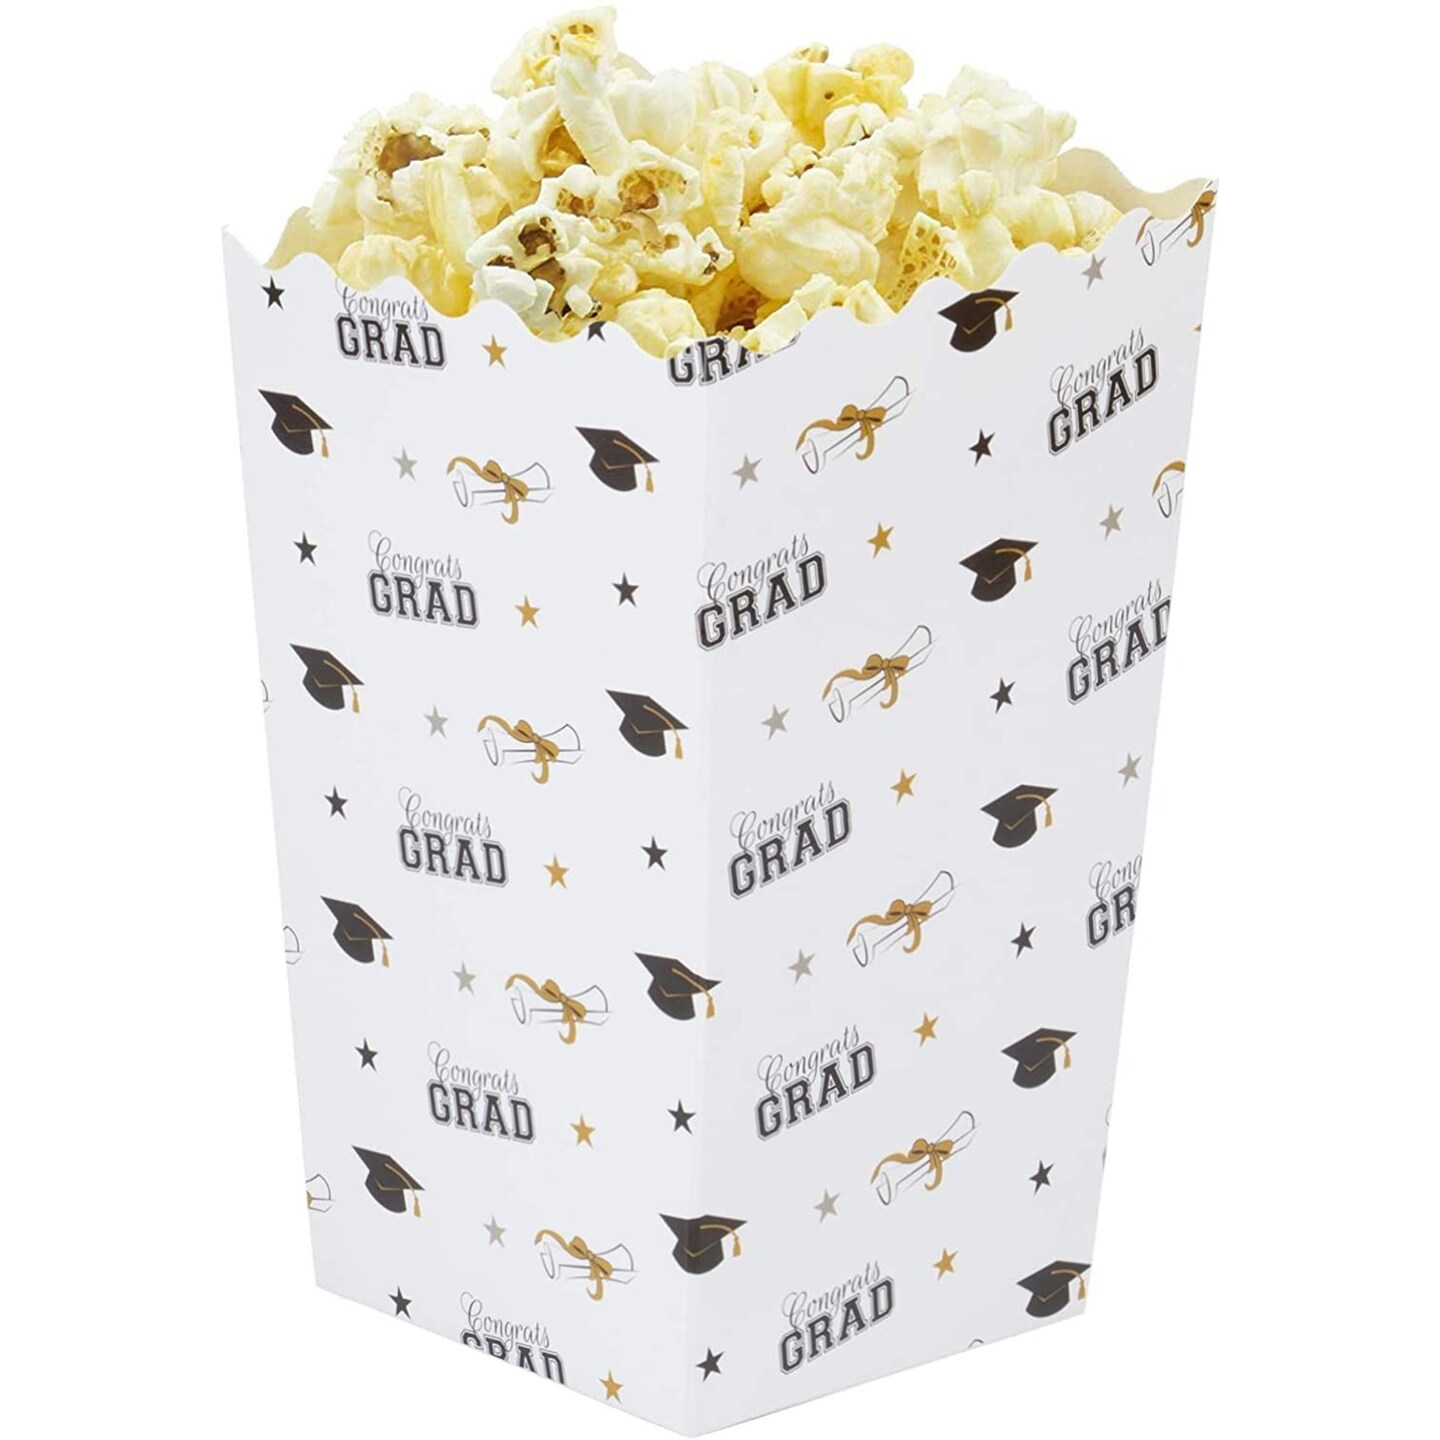 100 Pack Small Popcorn Party Favor Boxes, Class of 2024 Graduation Decor and Supplies, 3.3 x 5.5 in